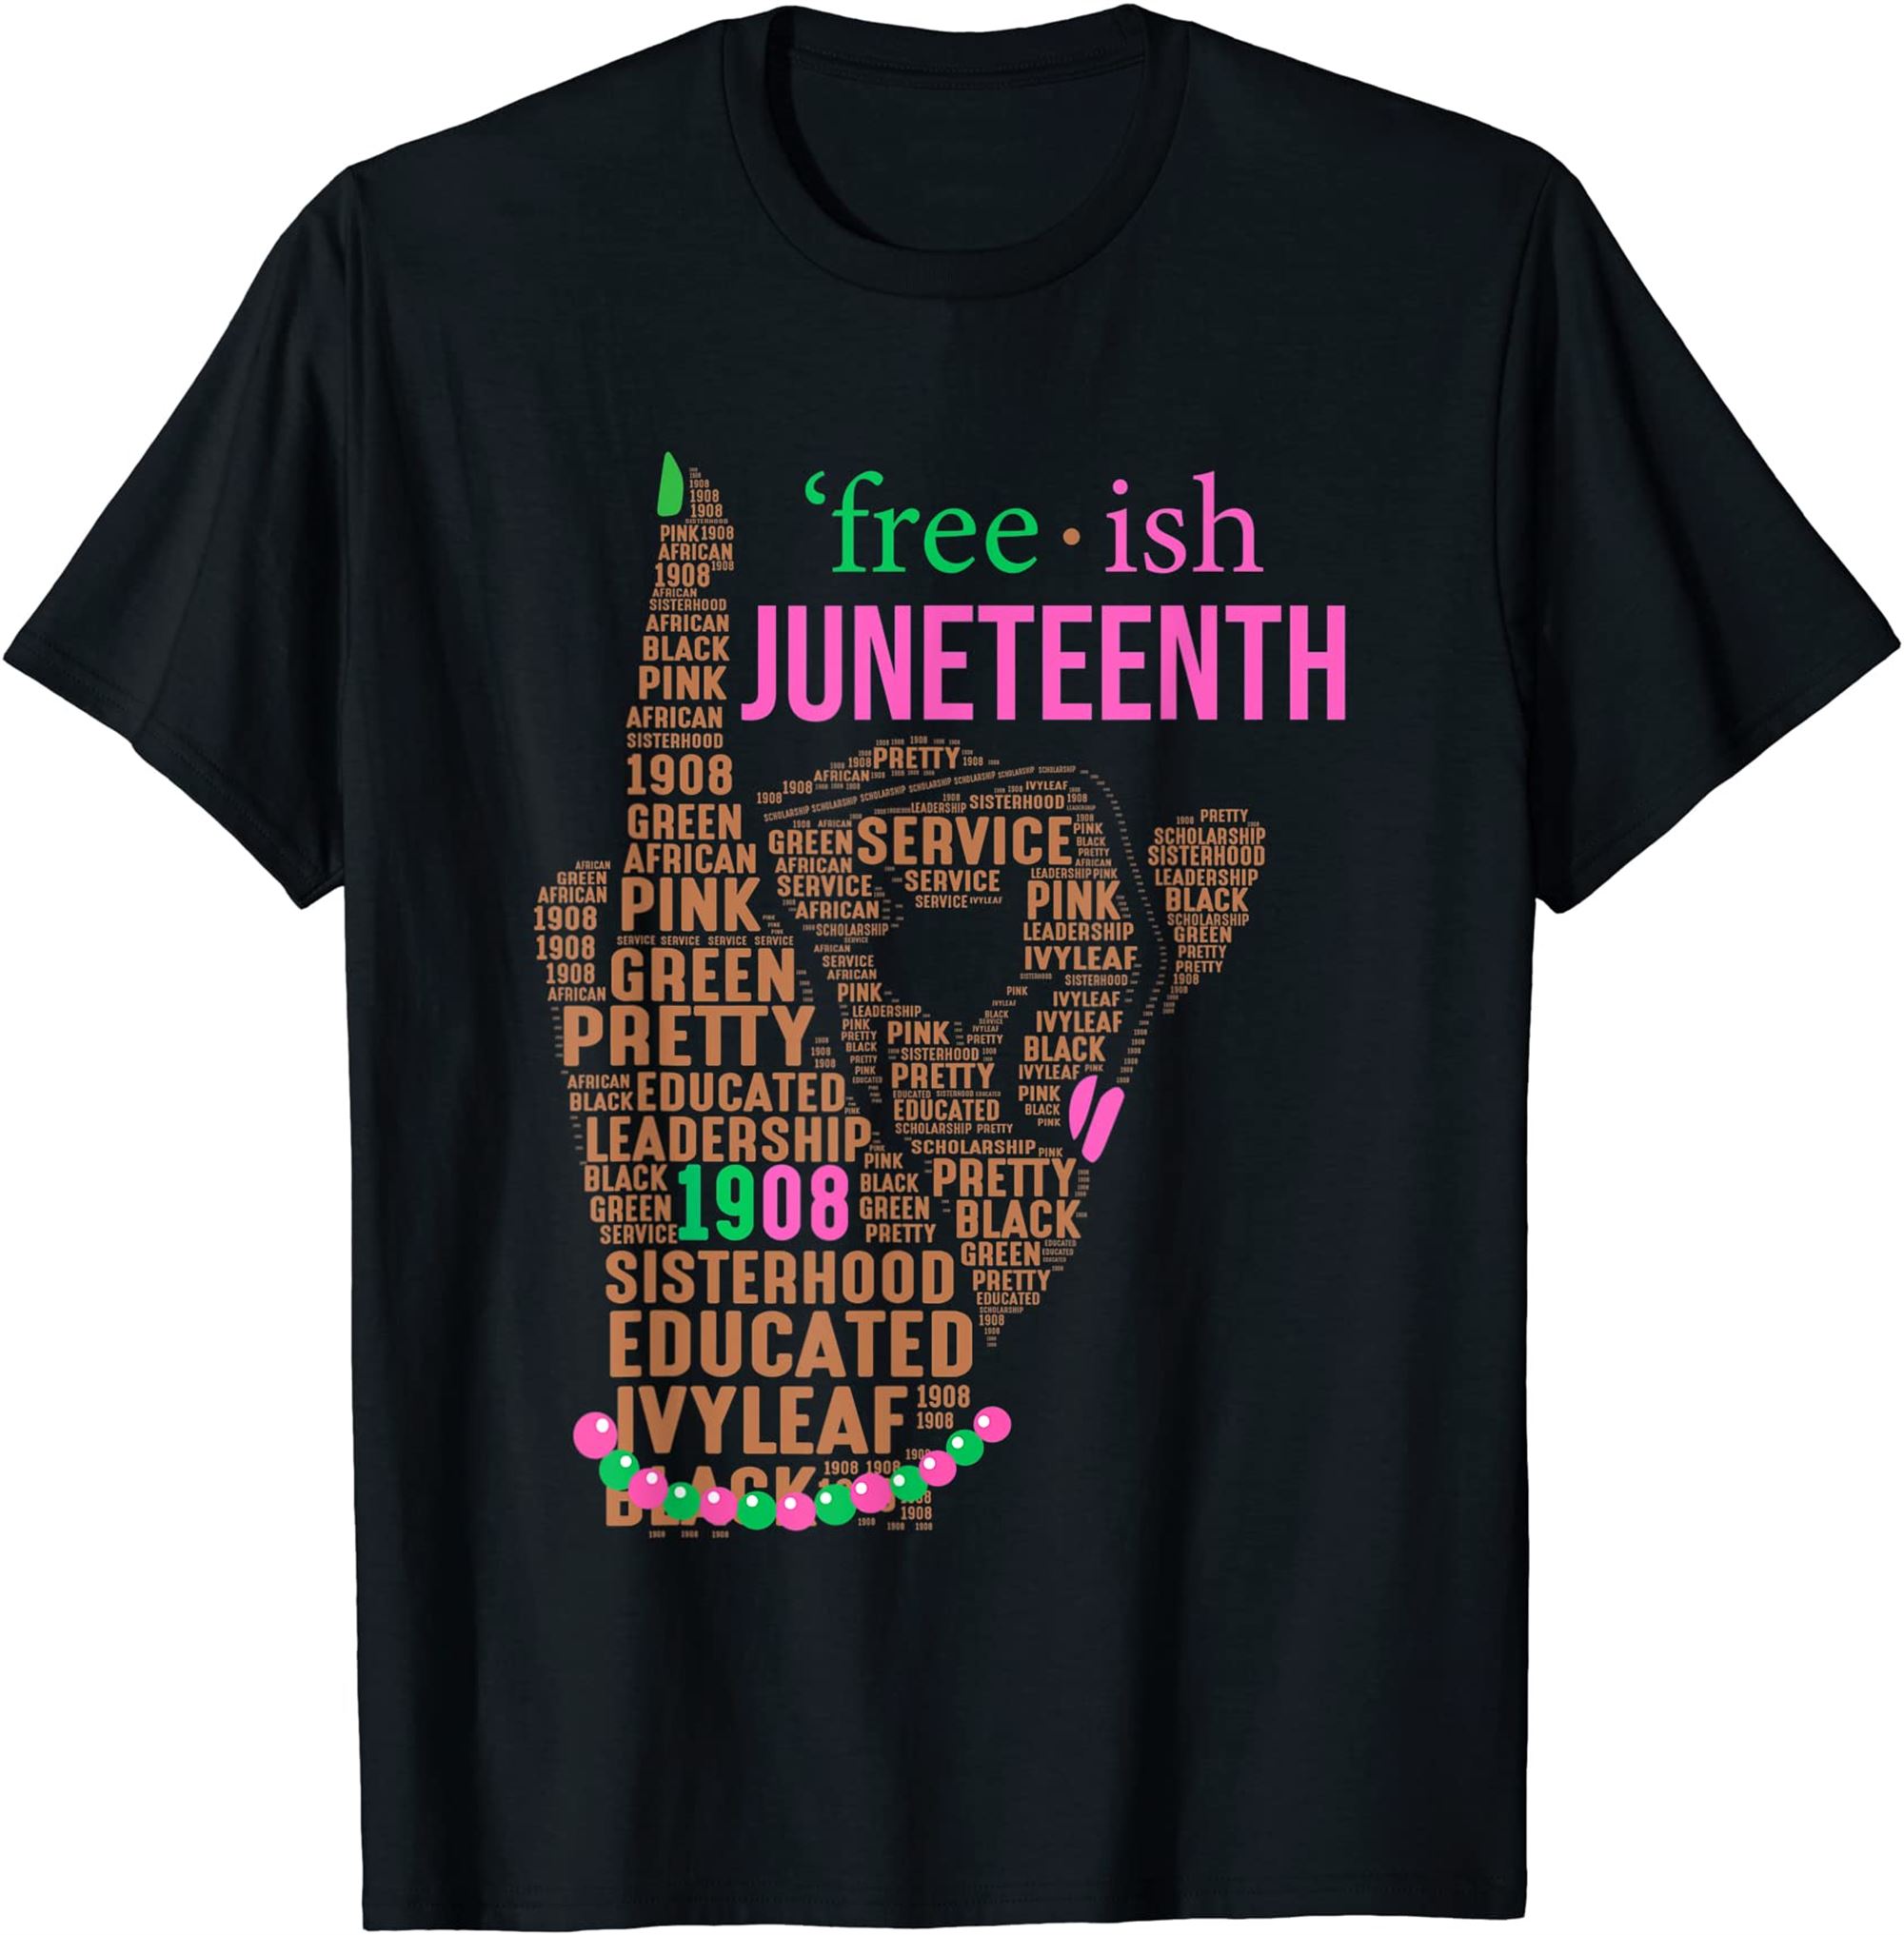 Juneteenth Aka Free Ish Since 1865 Independence Day Tshirt Plus Size Up To 5xl